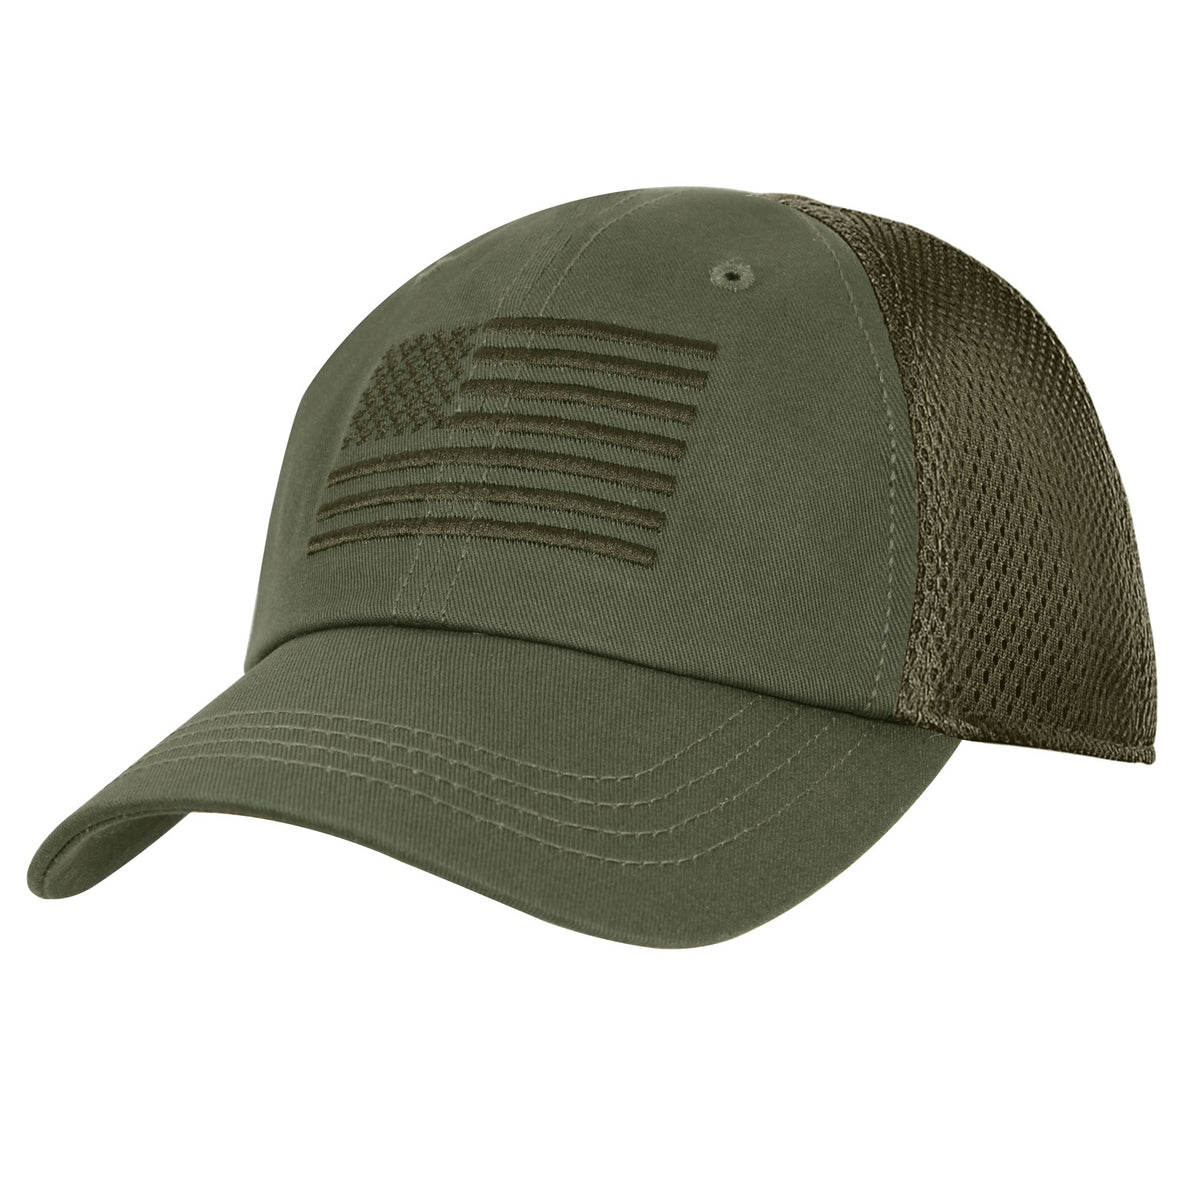 Rothco Operator Tactical Cap with US Flag, Multicam